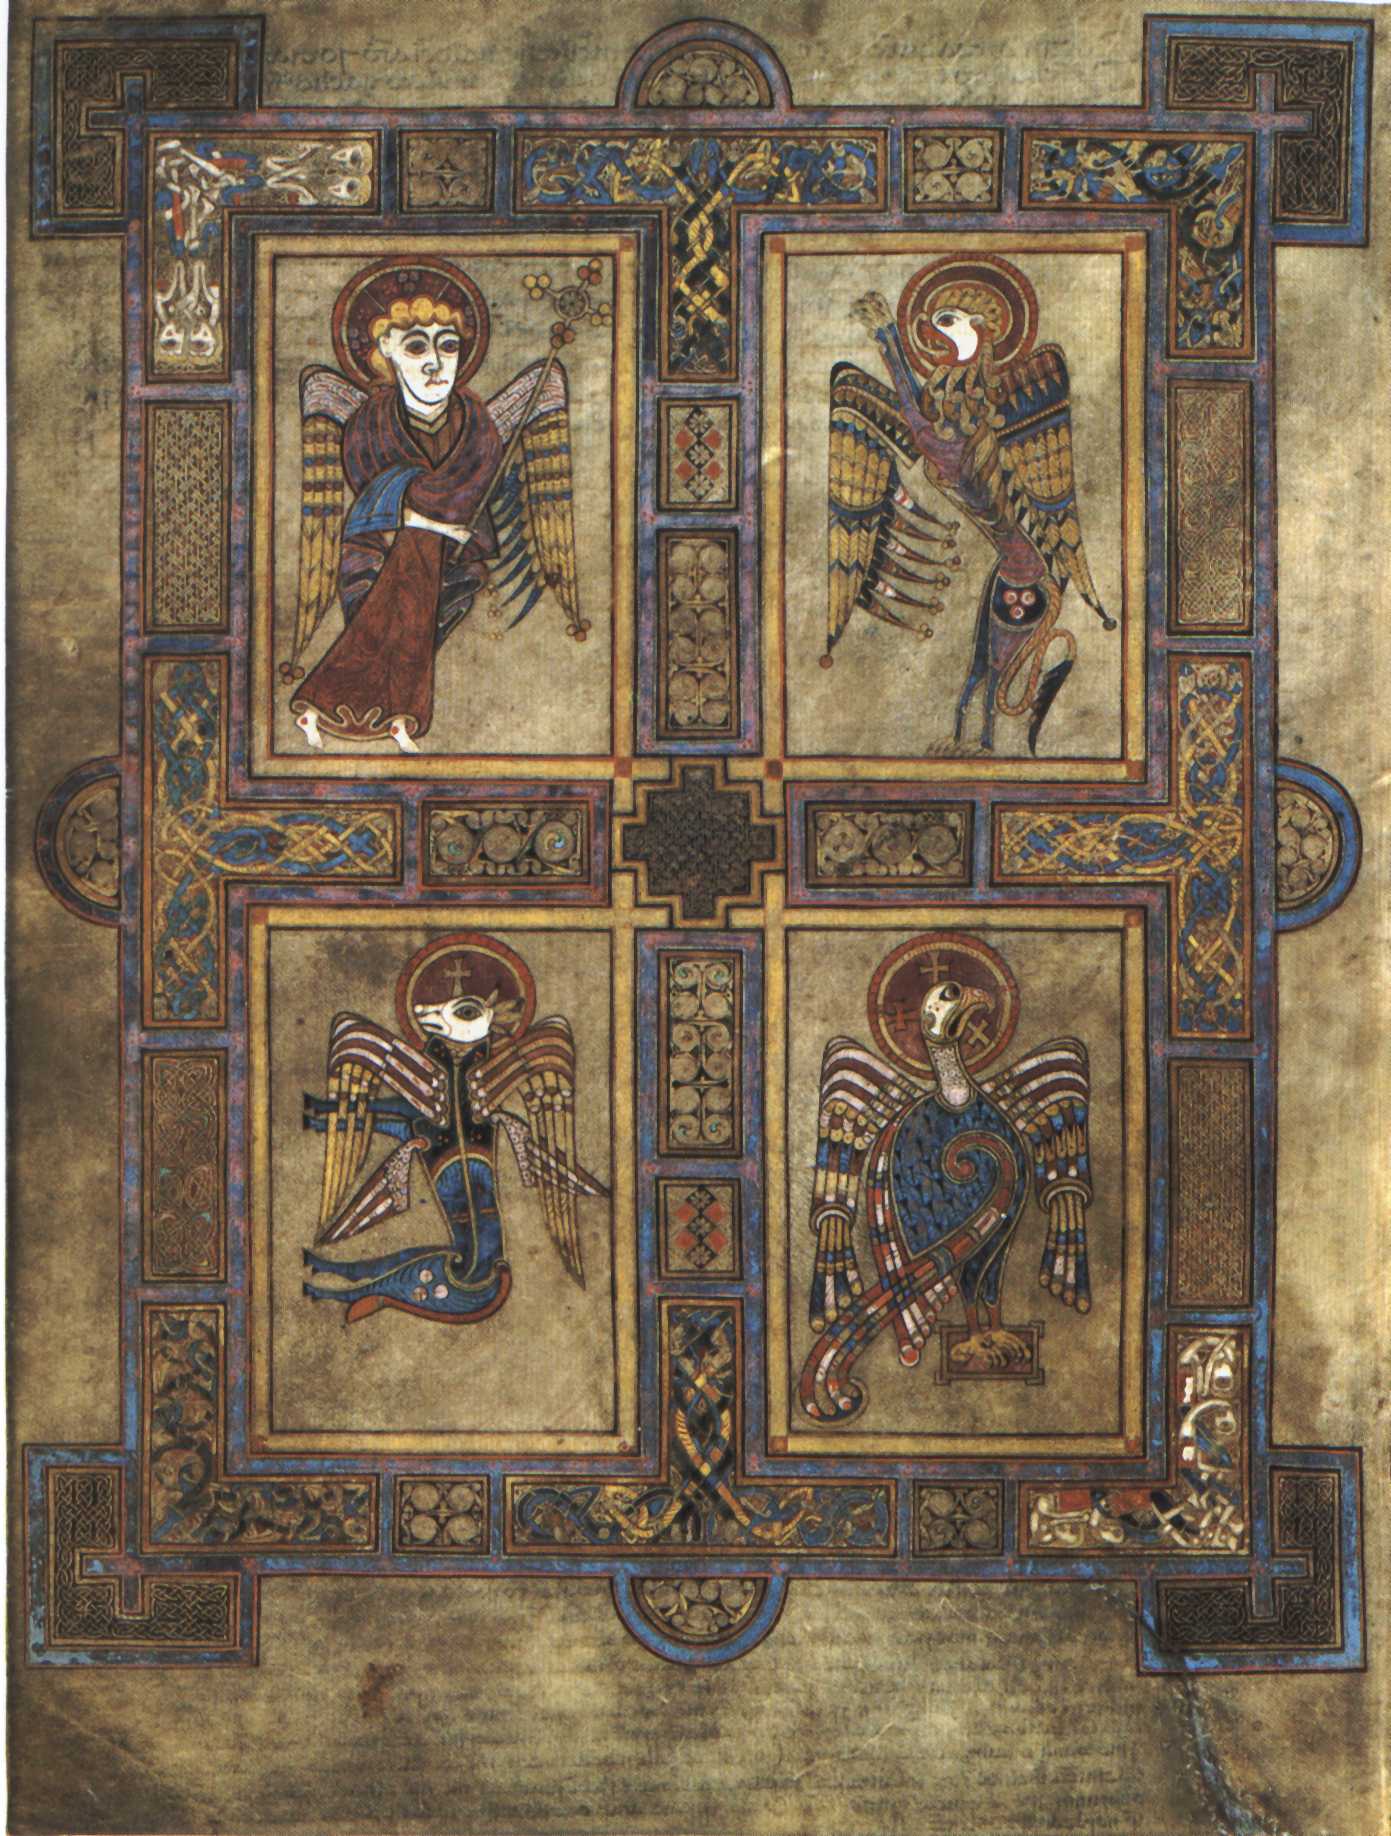 Symbols of the Four Evangelists from the Book of Kells